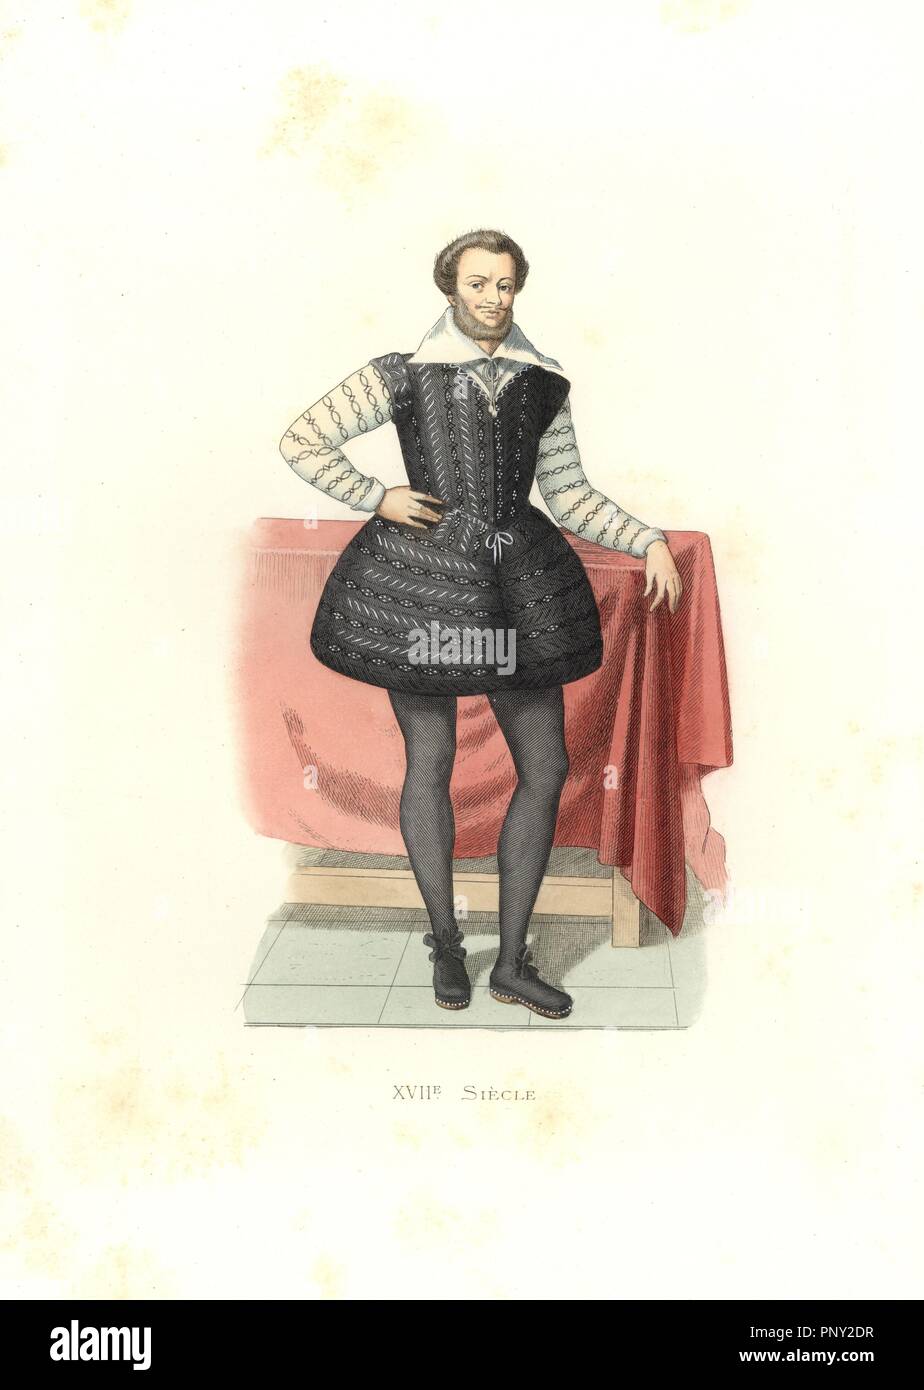 Antoine de Saint-Chamans, France, 17th century, from a print in the Bibliotheque Imperiale. Handcolored illustration by E. Lechevallier-Chevignard, lithographed by A. Didier, L. Flameng, F. Laguillermie, from Georges Duplessis's 'Costumes historiques des XVIe, XVIIe et XVIIIe siecles' (Historical costumes of the 16th, 17th and 18th centuries), Paris 1867. The book was a continuation of the series on the costumes of the 12th to 15th centuries published by Camille Bonnard and Paul Mercuri from 1830. Georges Duplessis (1834-1899) was curator of the Prints department at the Bibliotheque nationale. Stock Photo